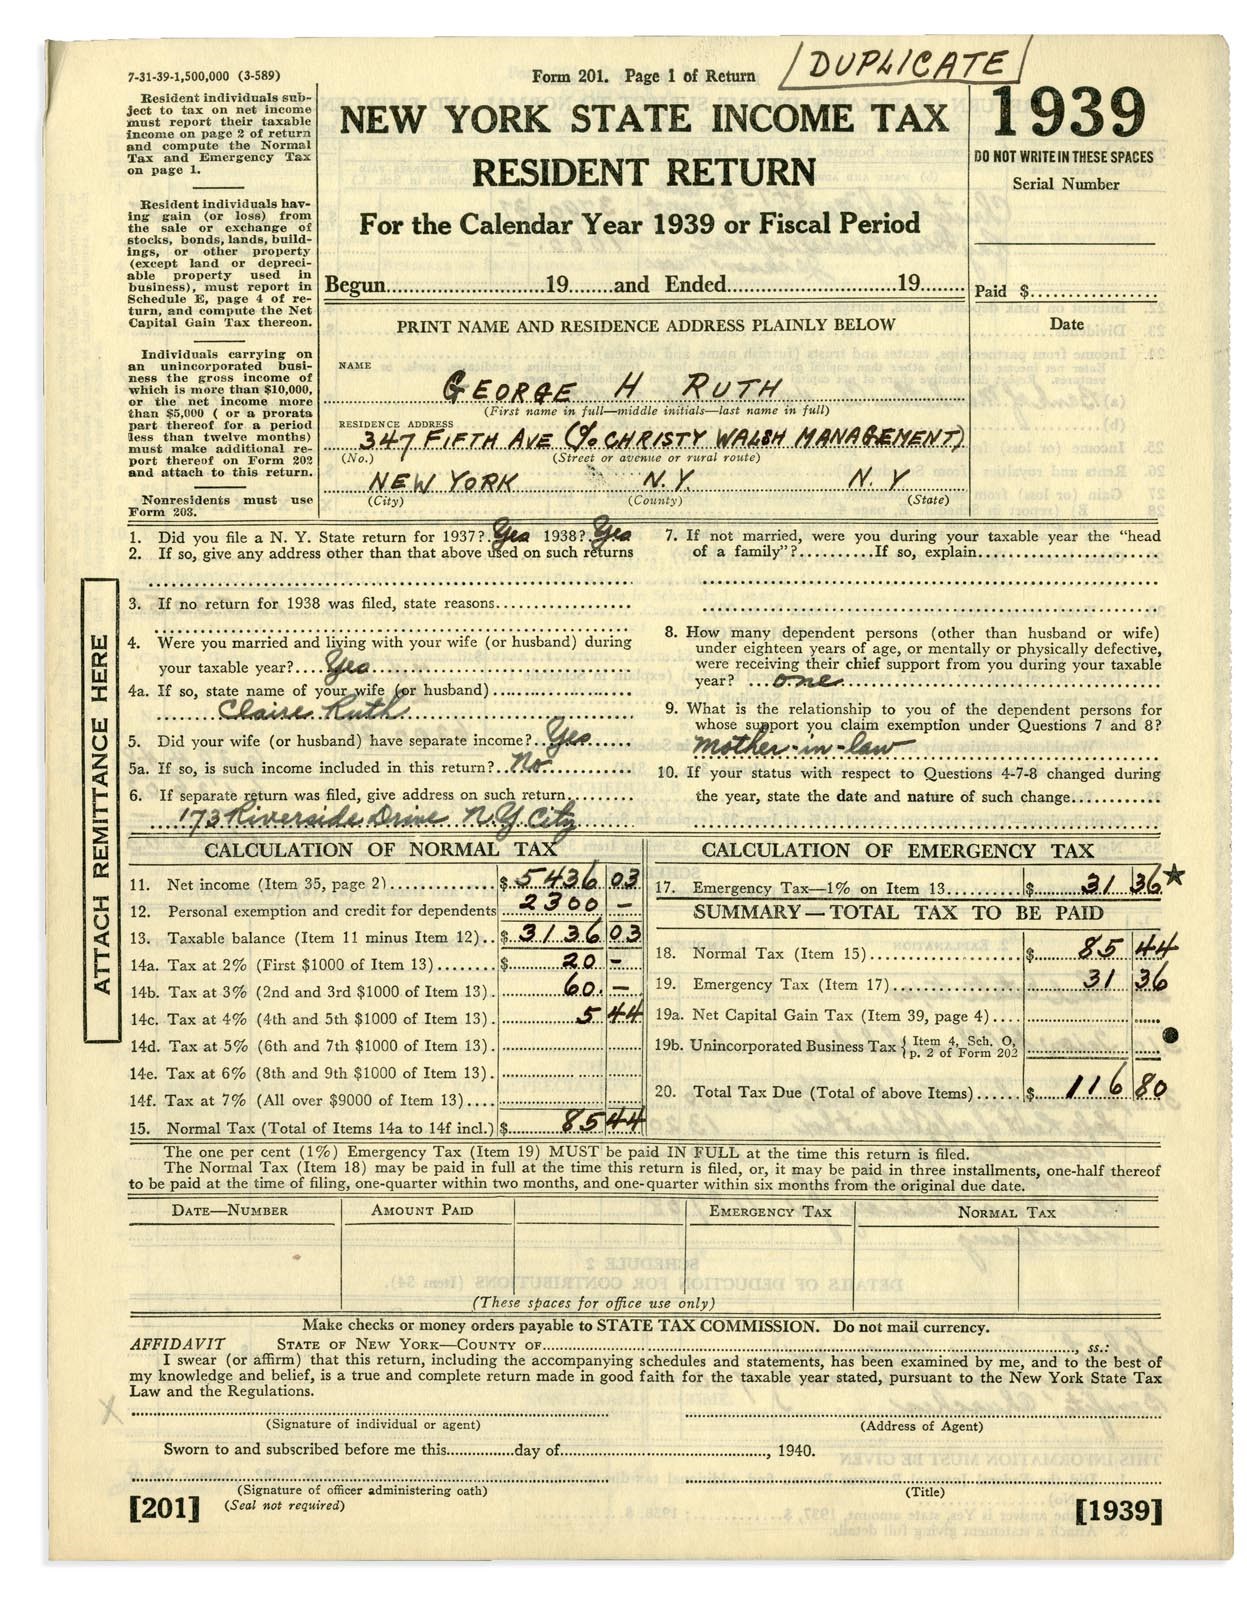 Babe Ruth 1939 N.Y. State Income Tax Return - Year of Cooperstown Opening